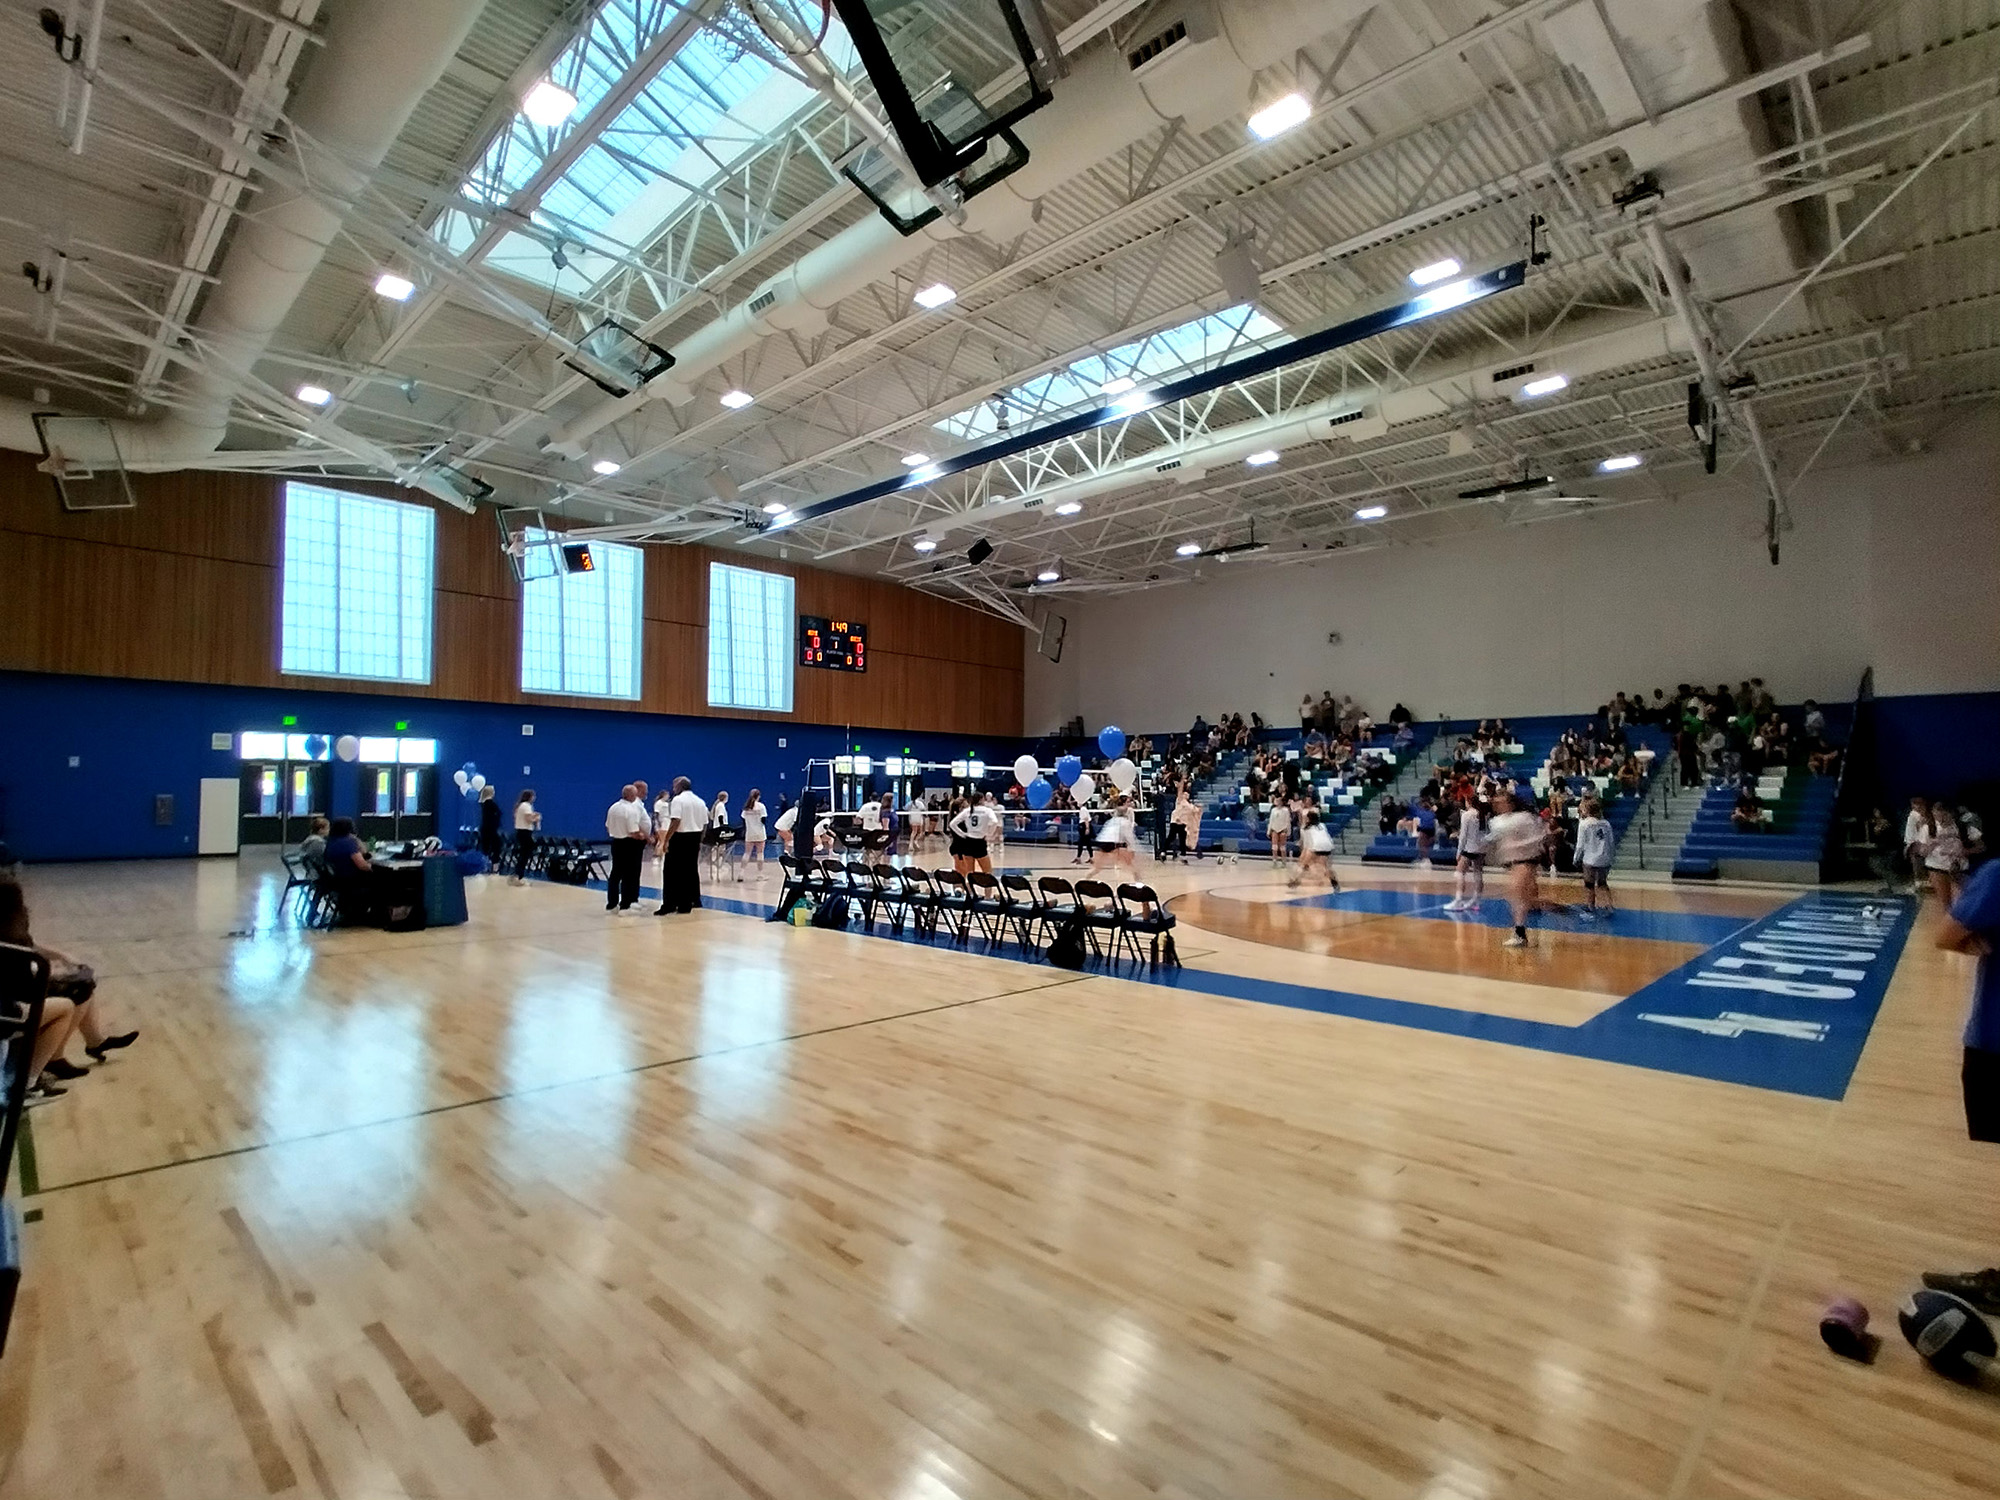 A look at Mountain View High School’s new gymnasium prior to a match betwen Union and Mountain View on Thursday, Sept. 8, 2022.